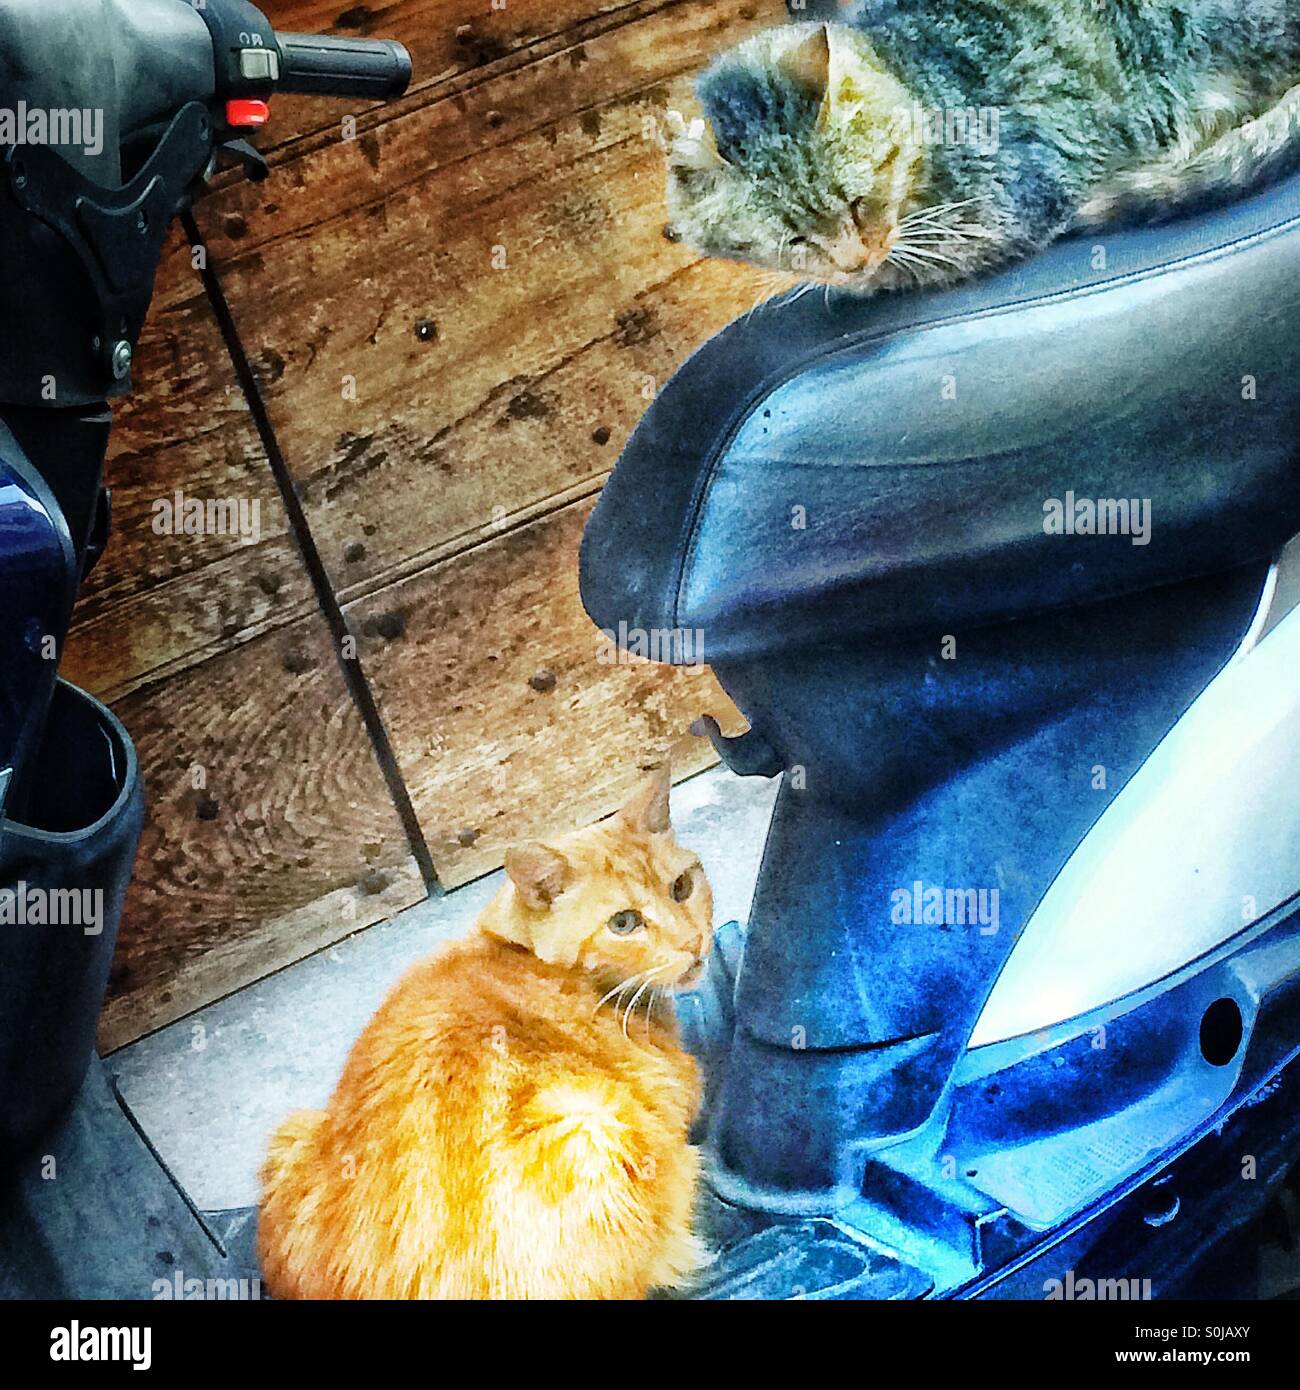 Two cats curled up on moped Stock Photo